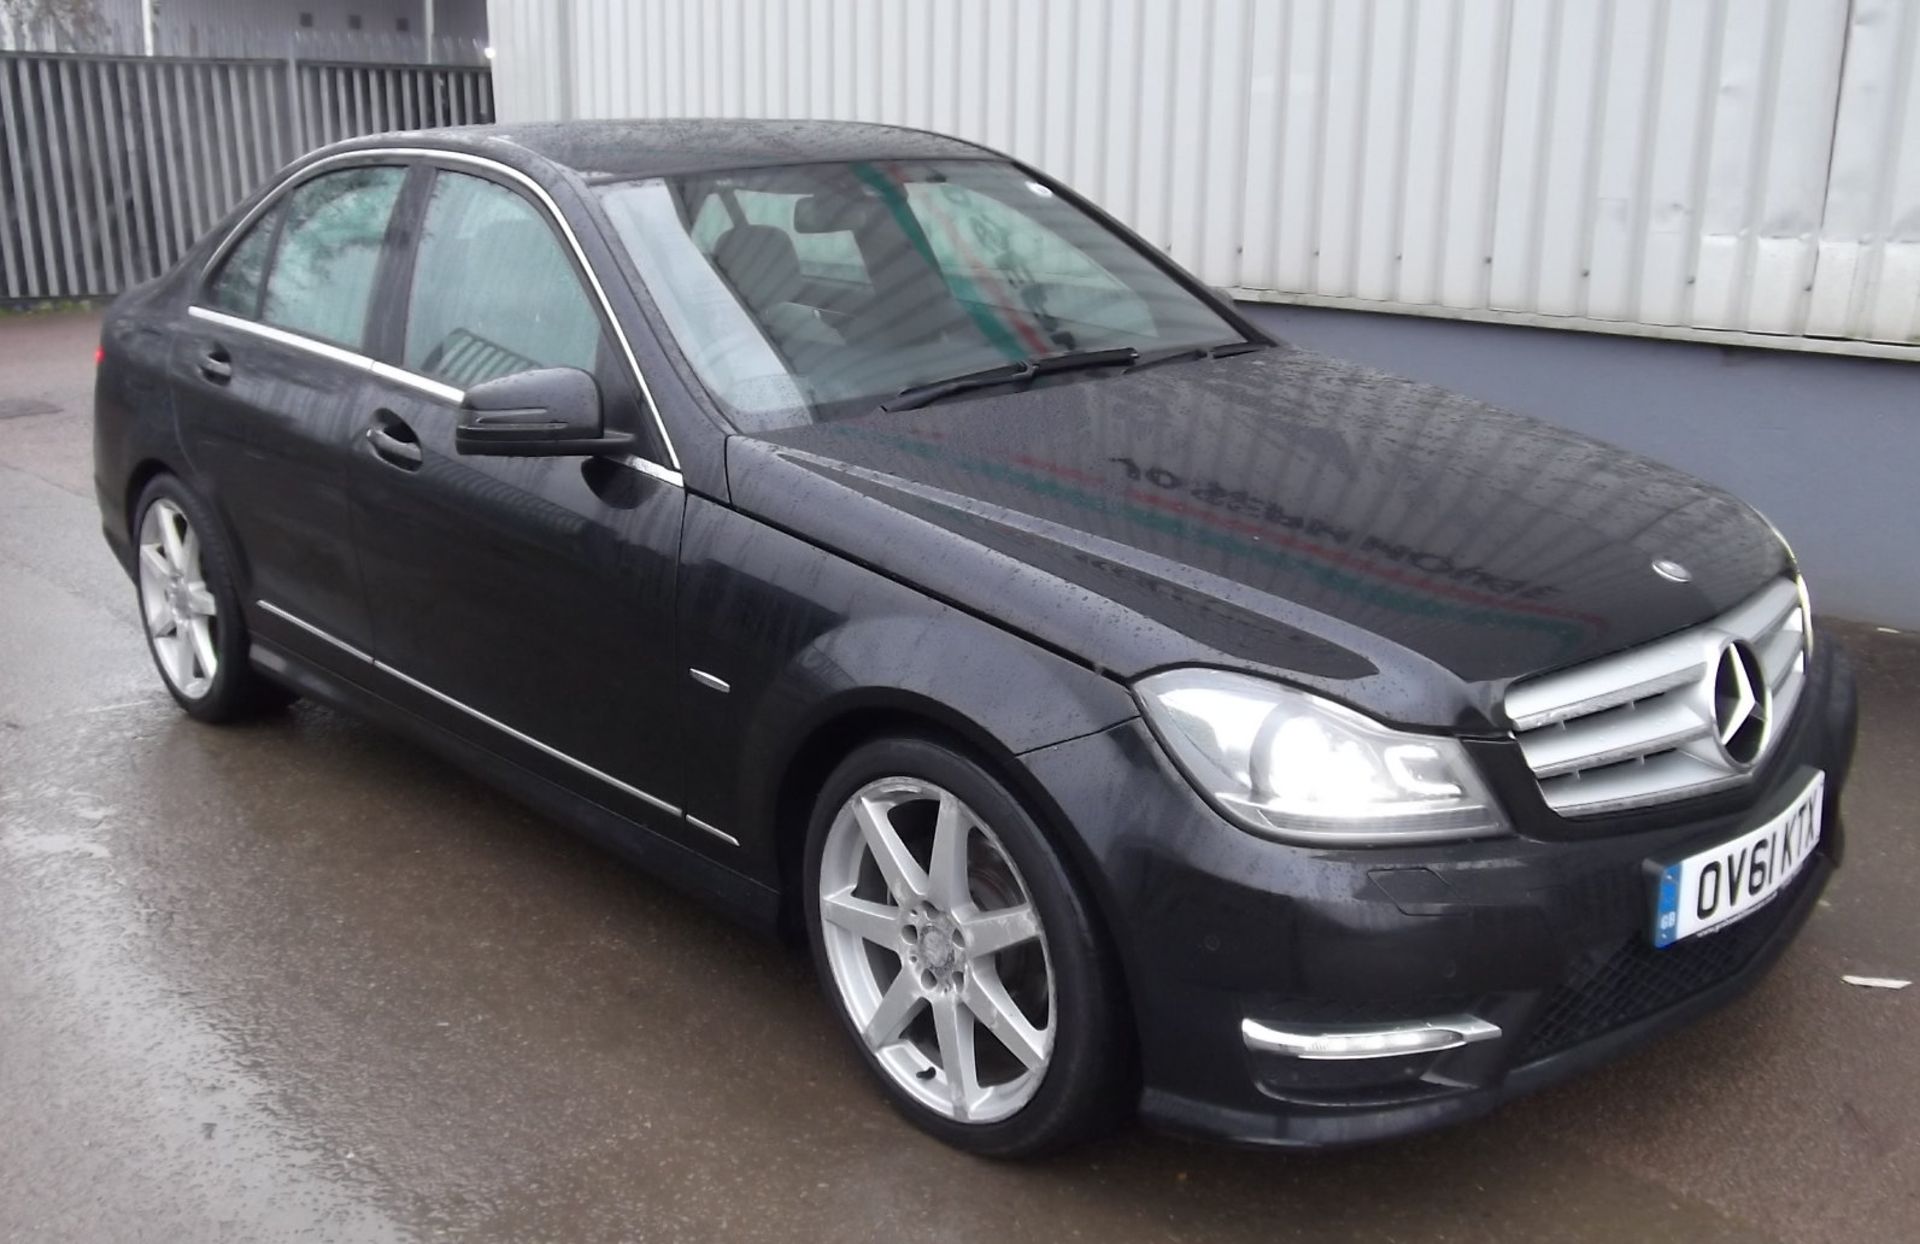 2011 Mercedes C220 CDI BlueEFFICIENCY Sport Edition 125 4dr Auto Saloon - CL505 - NO VAT ON THE HAMM - Image 8 of 21